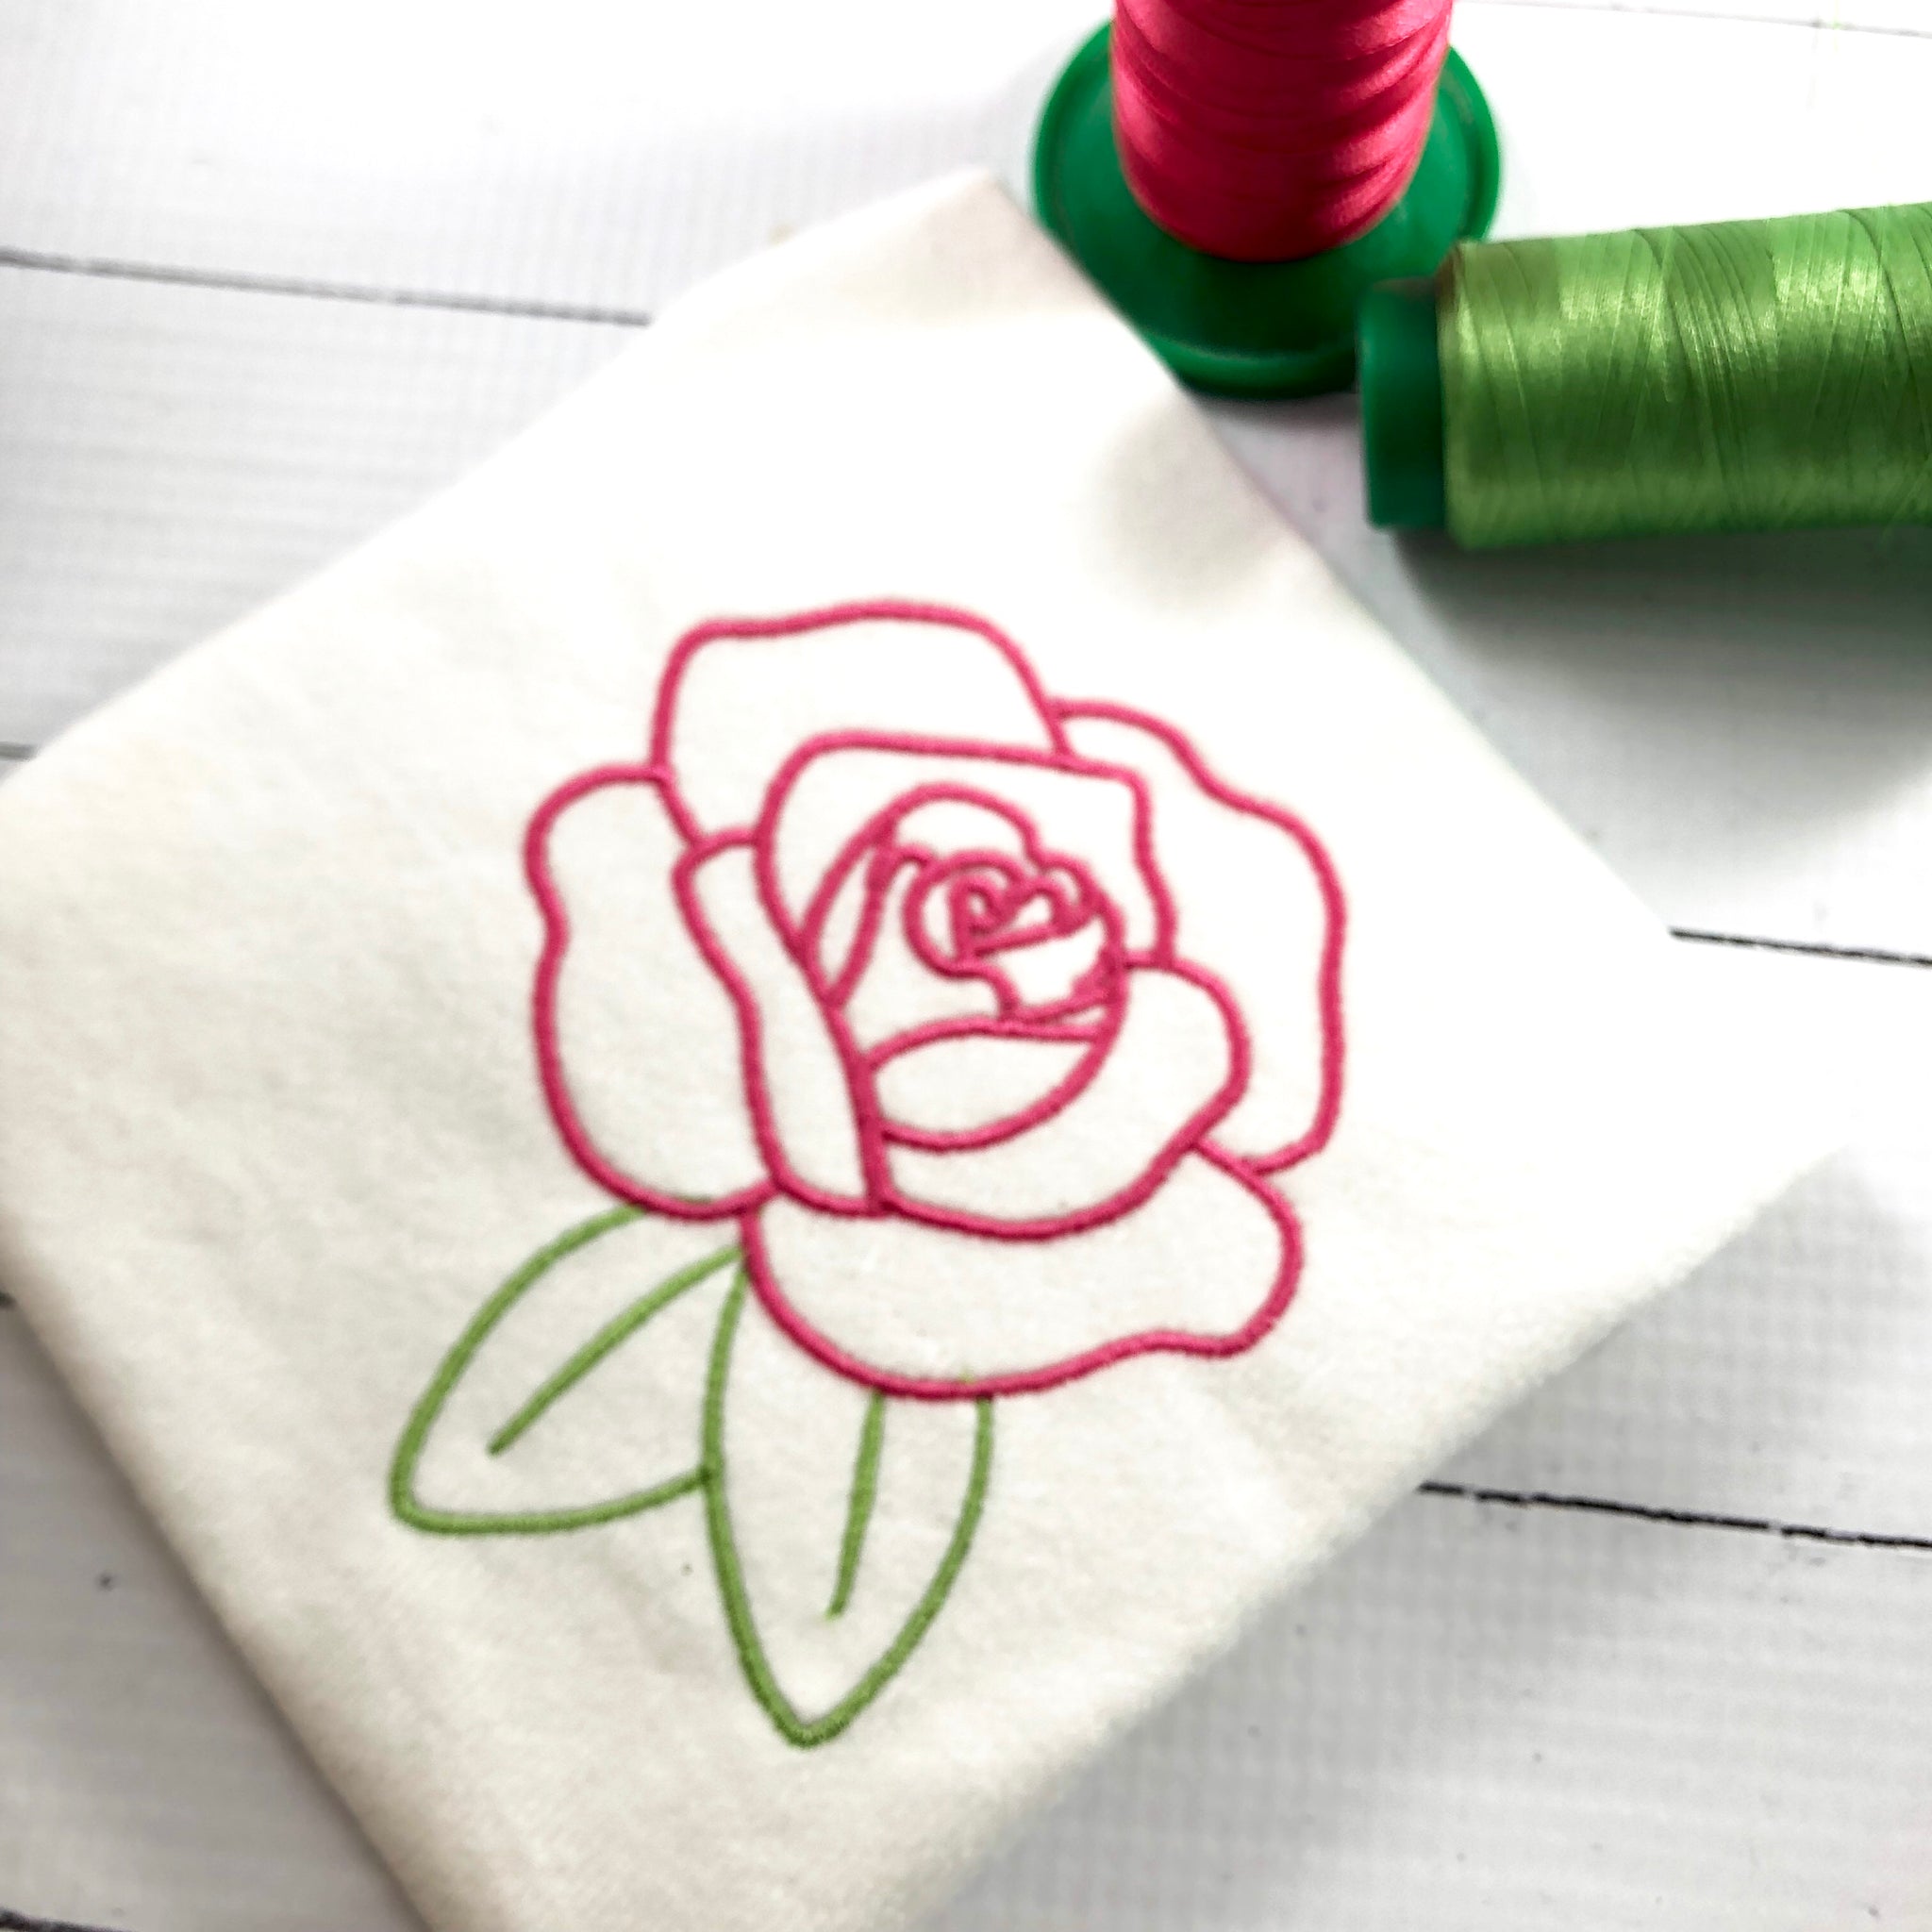 Rose Embroidery Patterns | Embroidery Shops